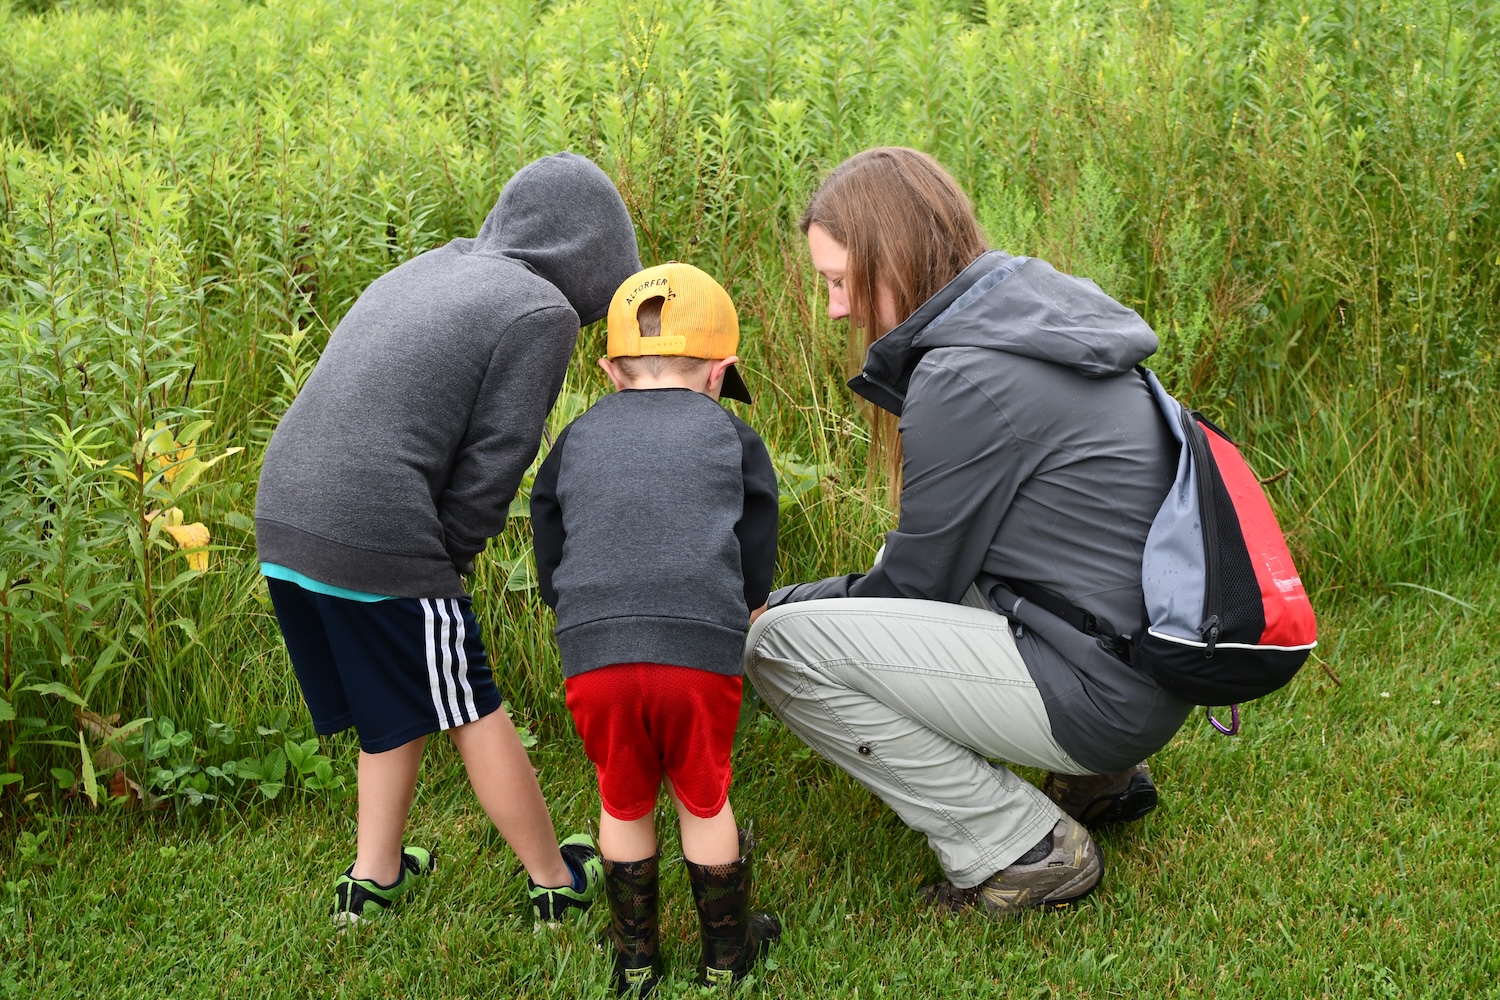 An adult crouched down to show two kids something in the grass.